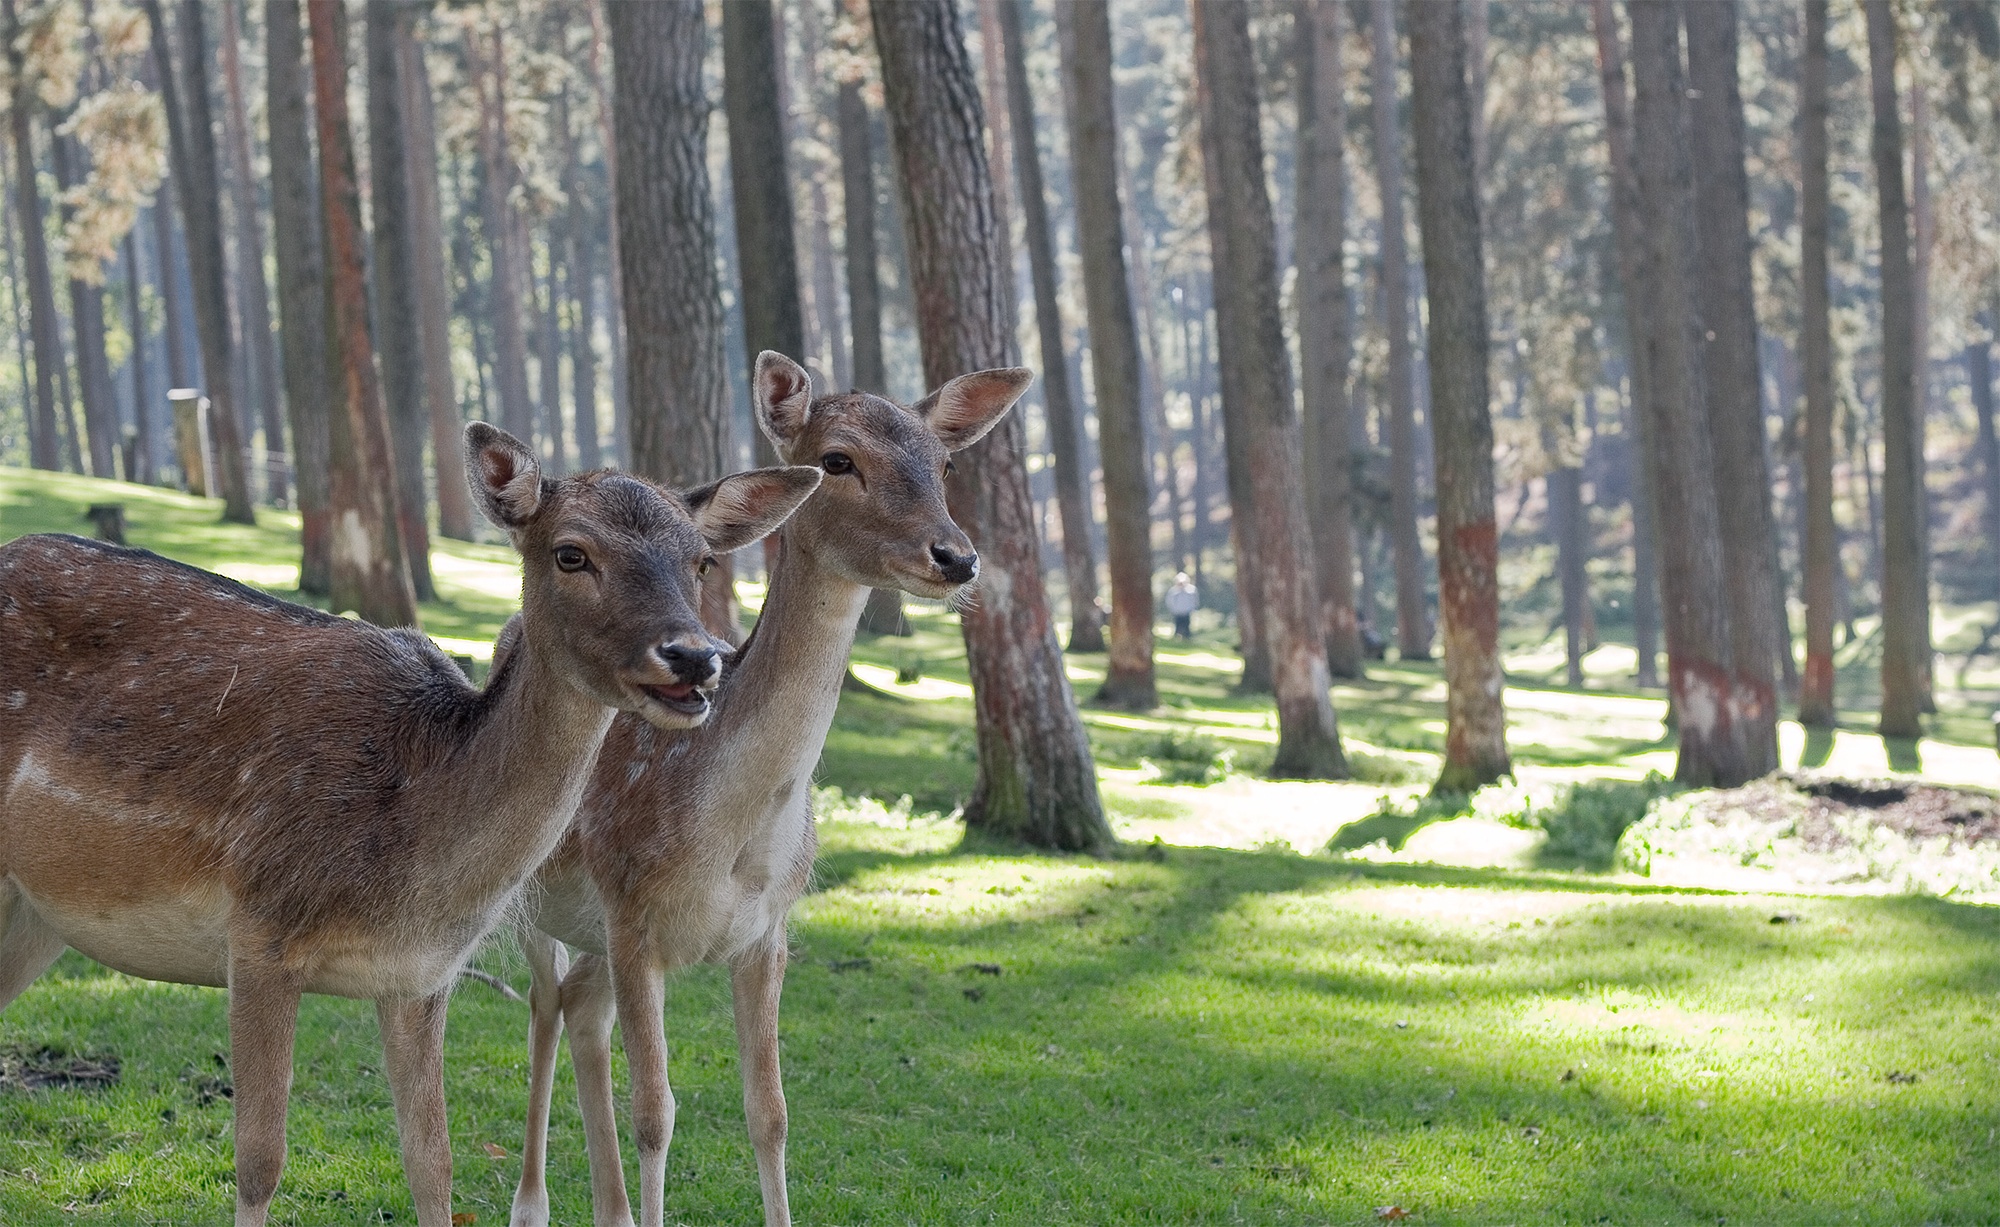 Couple, Animal, Deer, Fast, Forest, HQ Photo